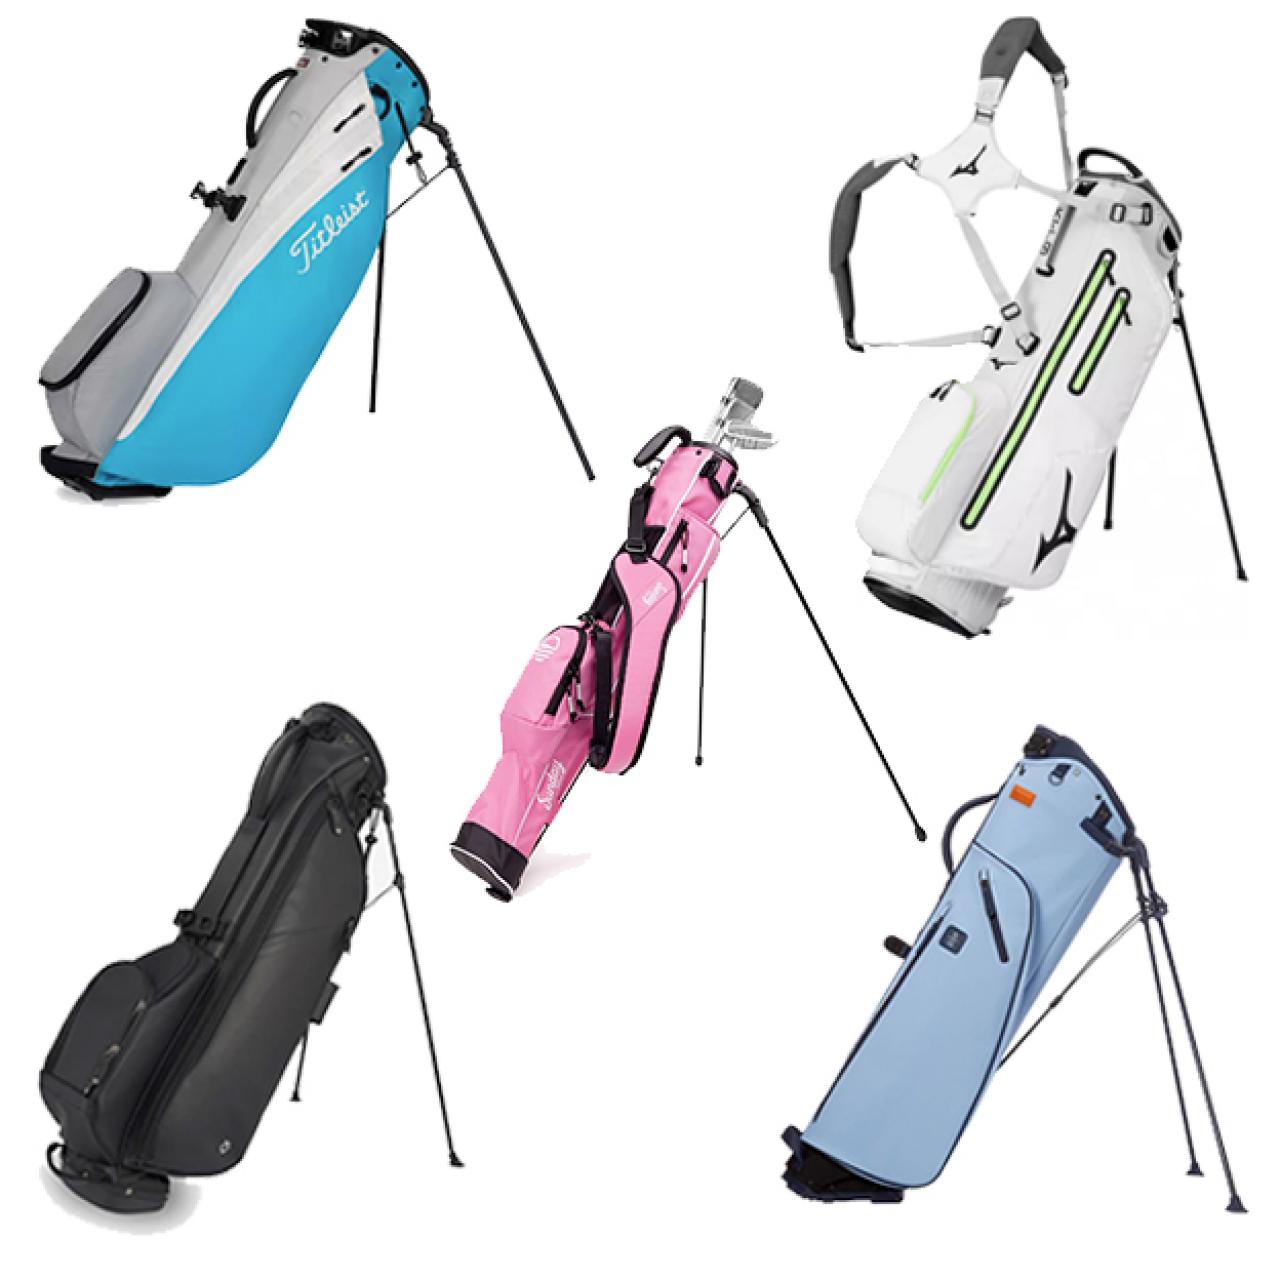 Cerdito guardarropa Gasto The best women's golf bags for 2022, according to Golf Digest Editors | Golf  Equipment: Clubs, Balls, Bags | Golf Digest